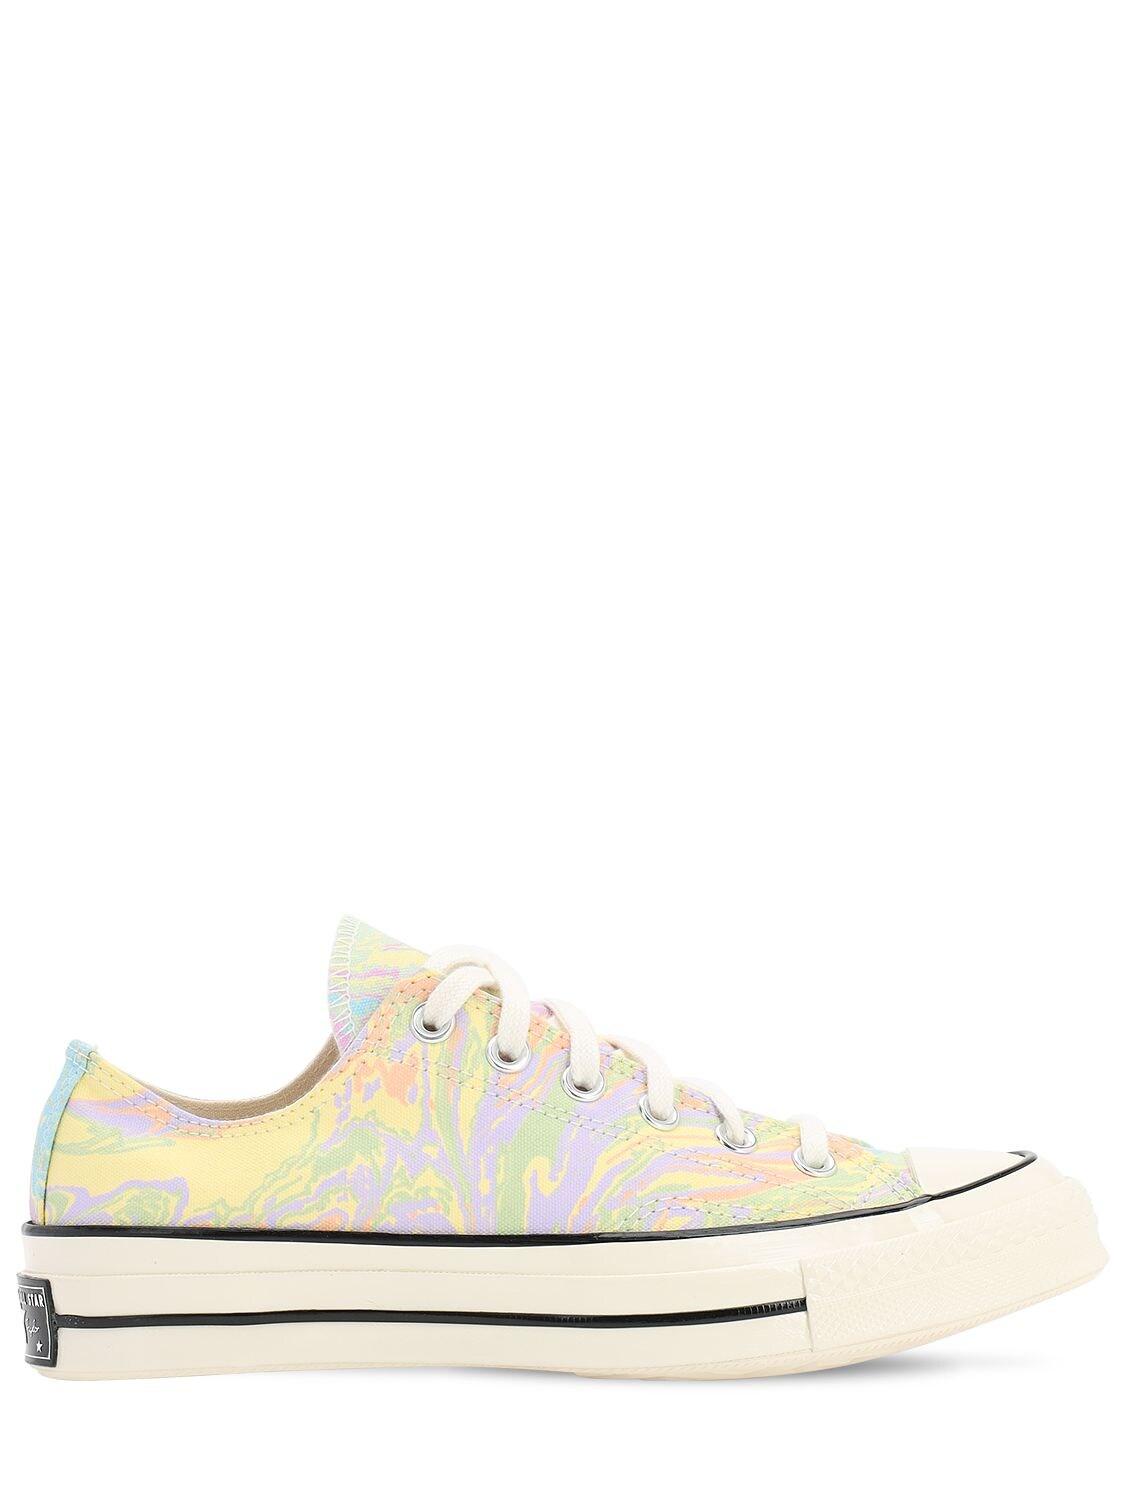 Converse Canvas Chuck 70 Ox Marble Sneakers in White - Lyst